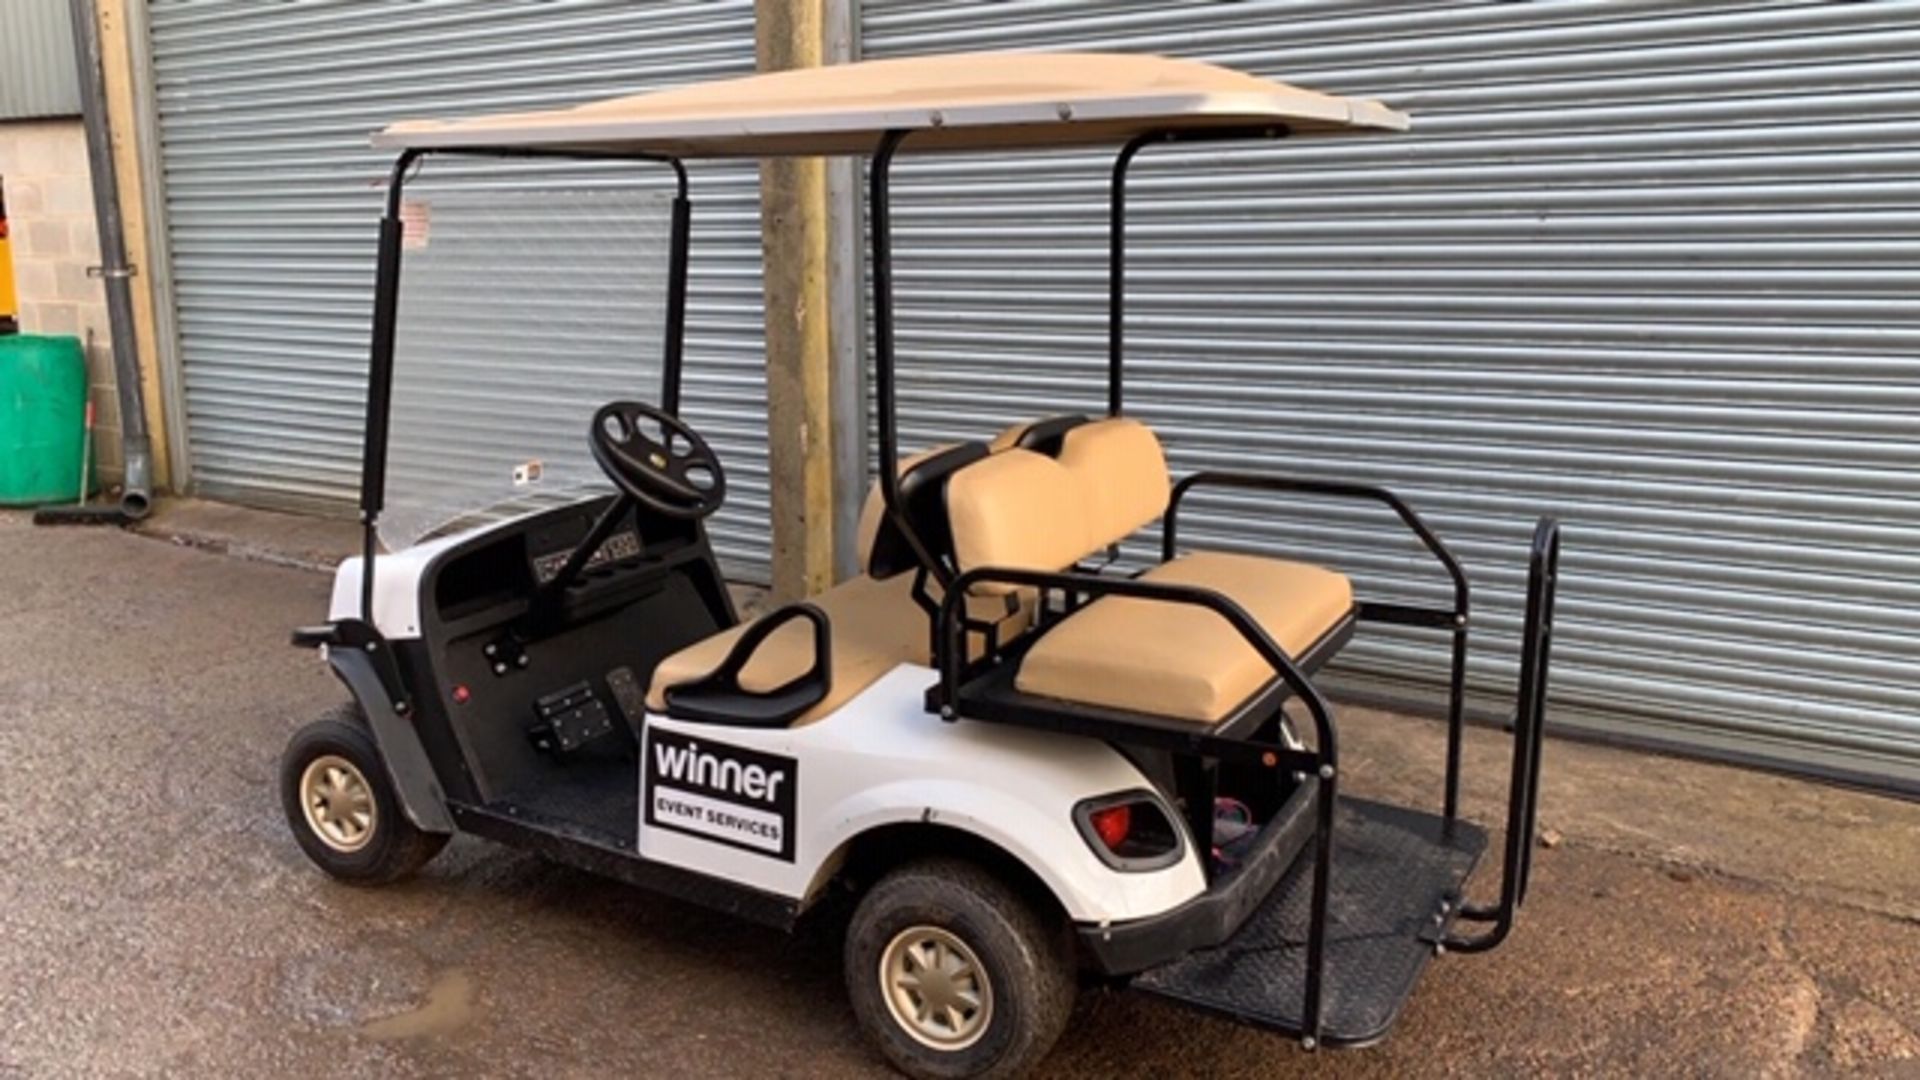 CUSHMAN EZGO SHUTTLE 4 PETROL ENGINED 4 SEATER GOLF / EVENTS BUGGY. YEAR 2017 BUILD. UNKNOWN HRS. - Image 4 of 5